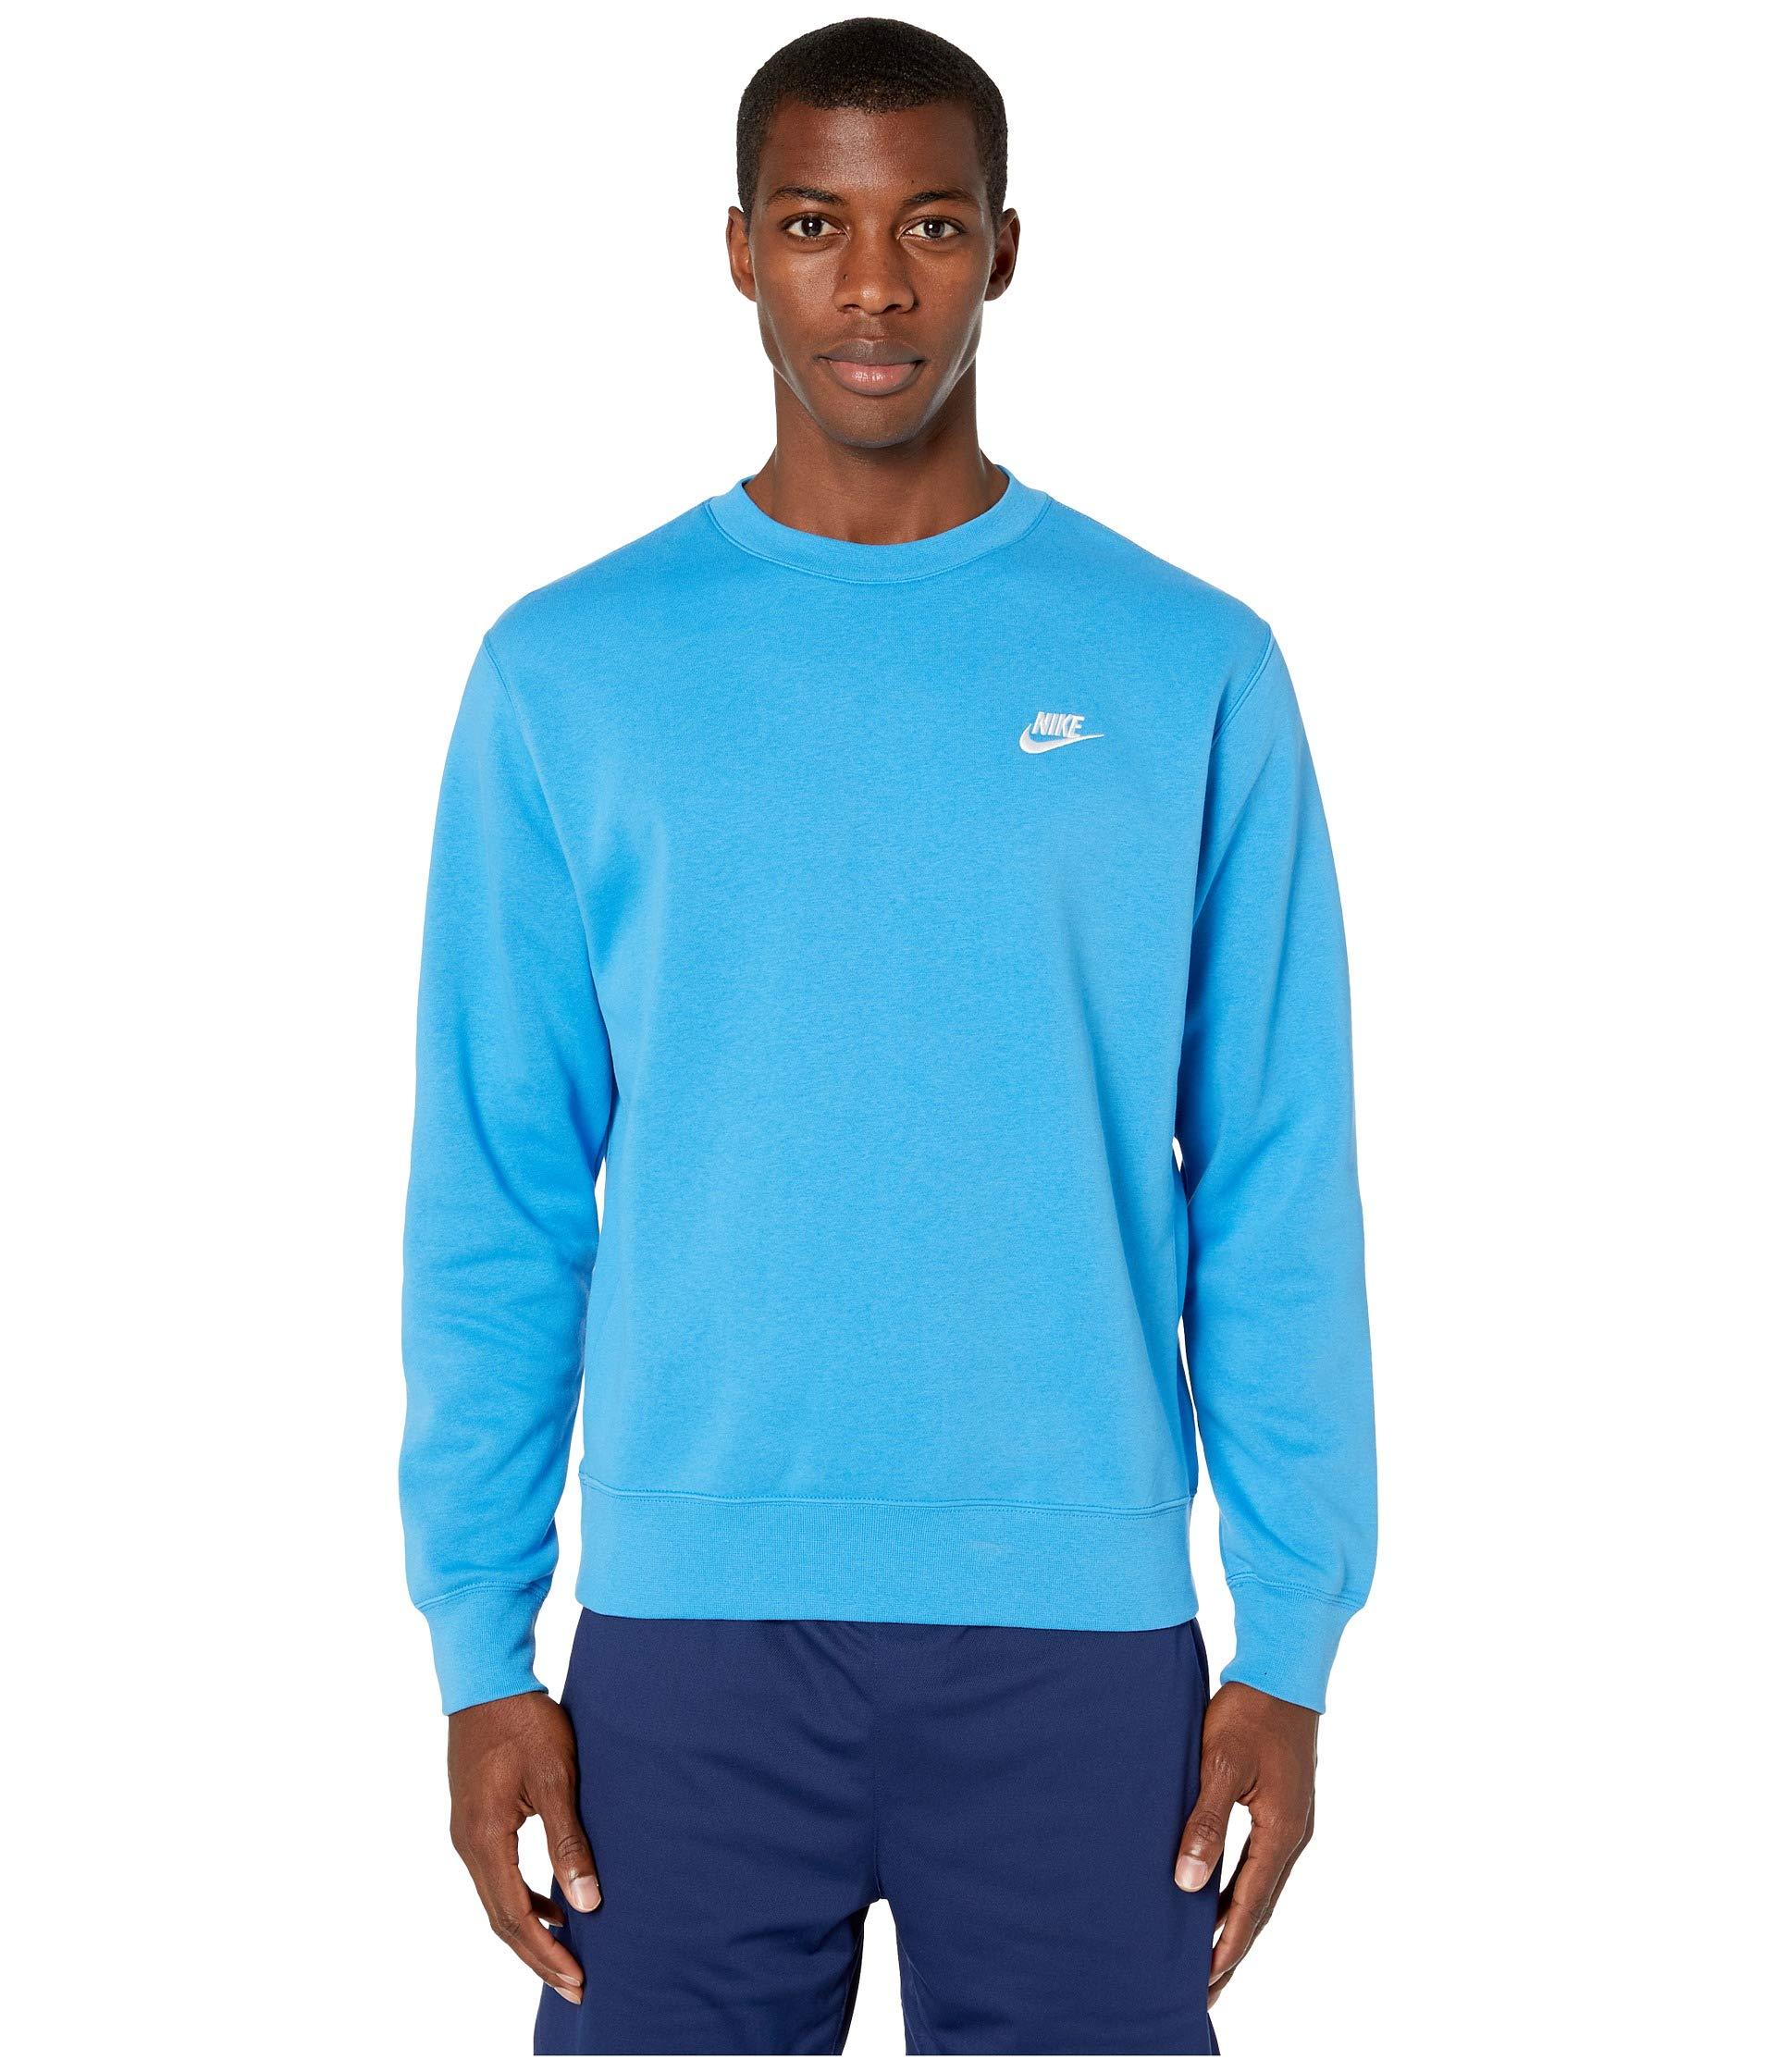 Nike Cotton Nsw Club Crew in Blue for Men - Lyst